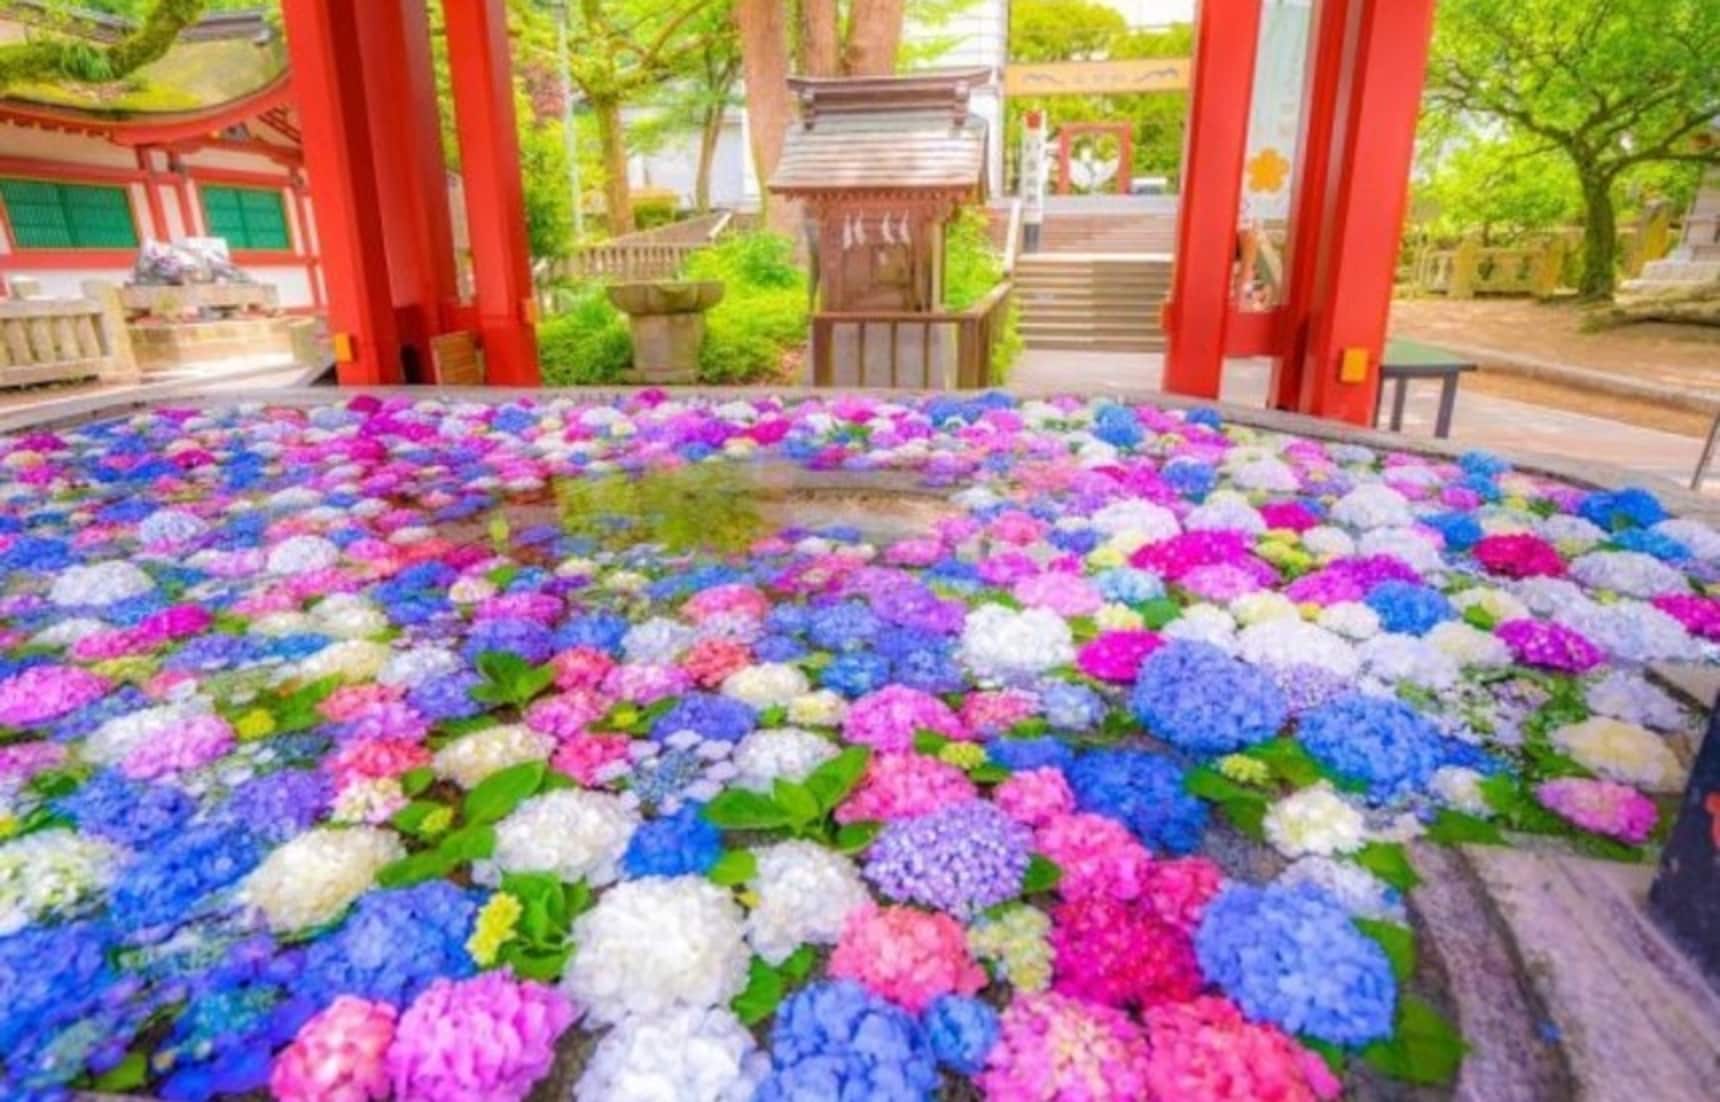 Shrines Transform With Colorful Flowers | All About Japan